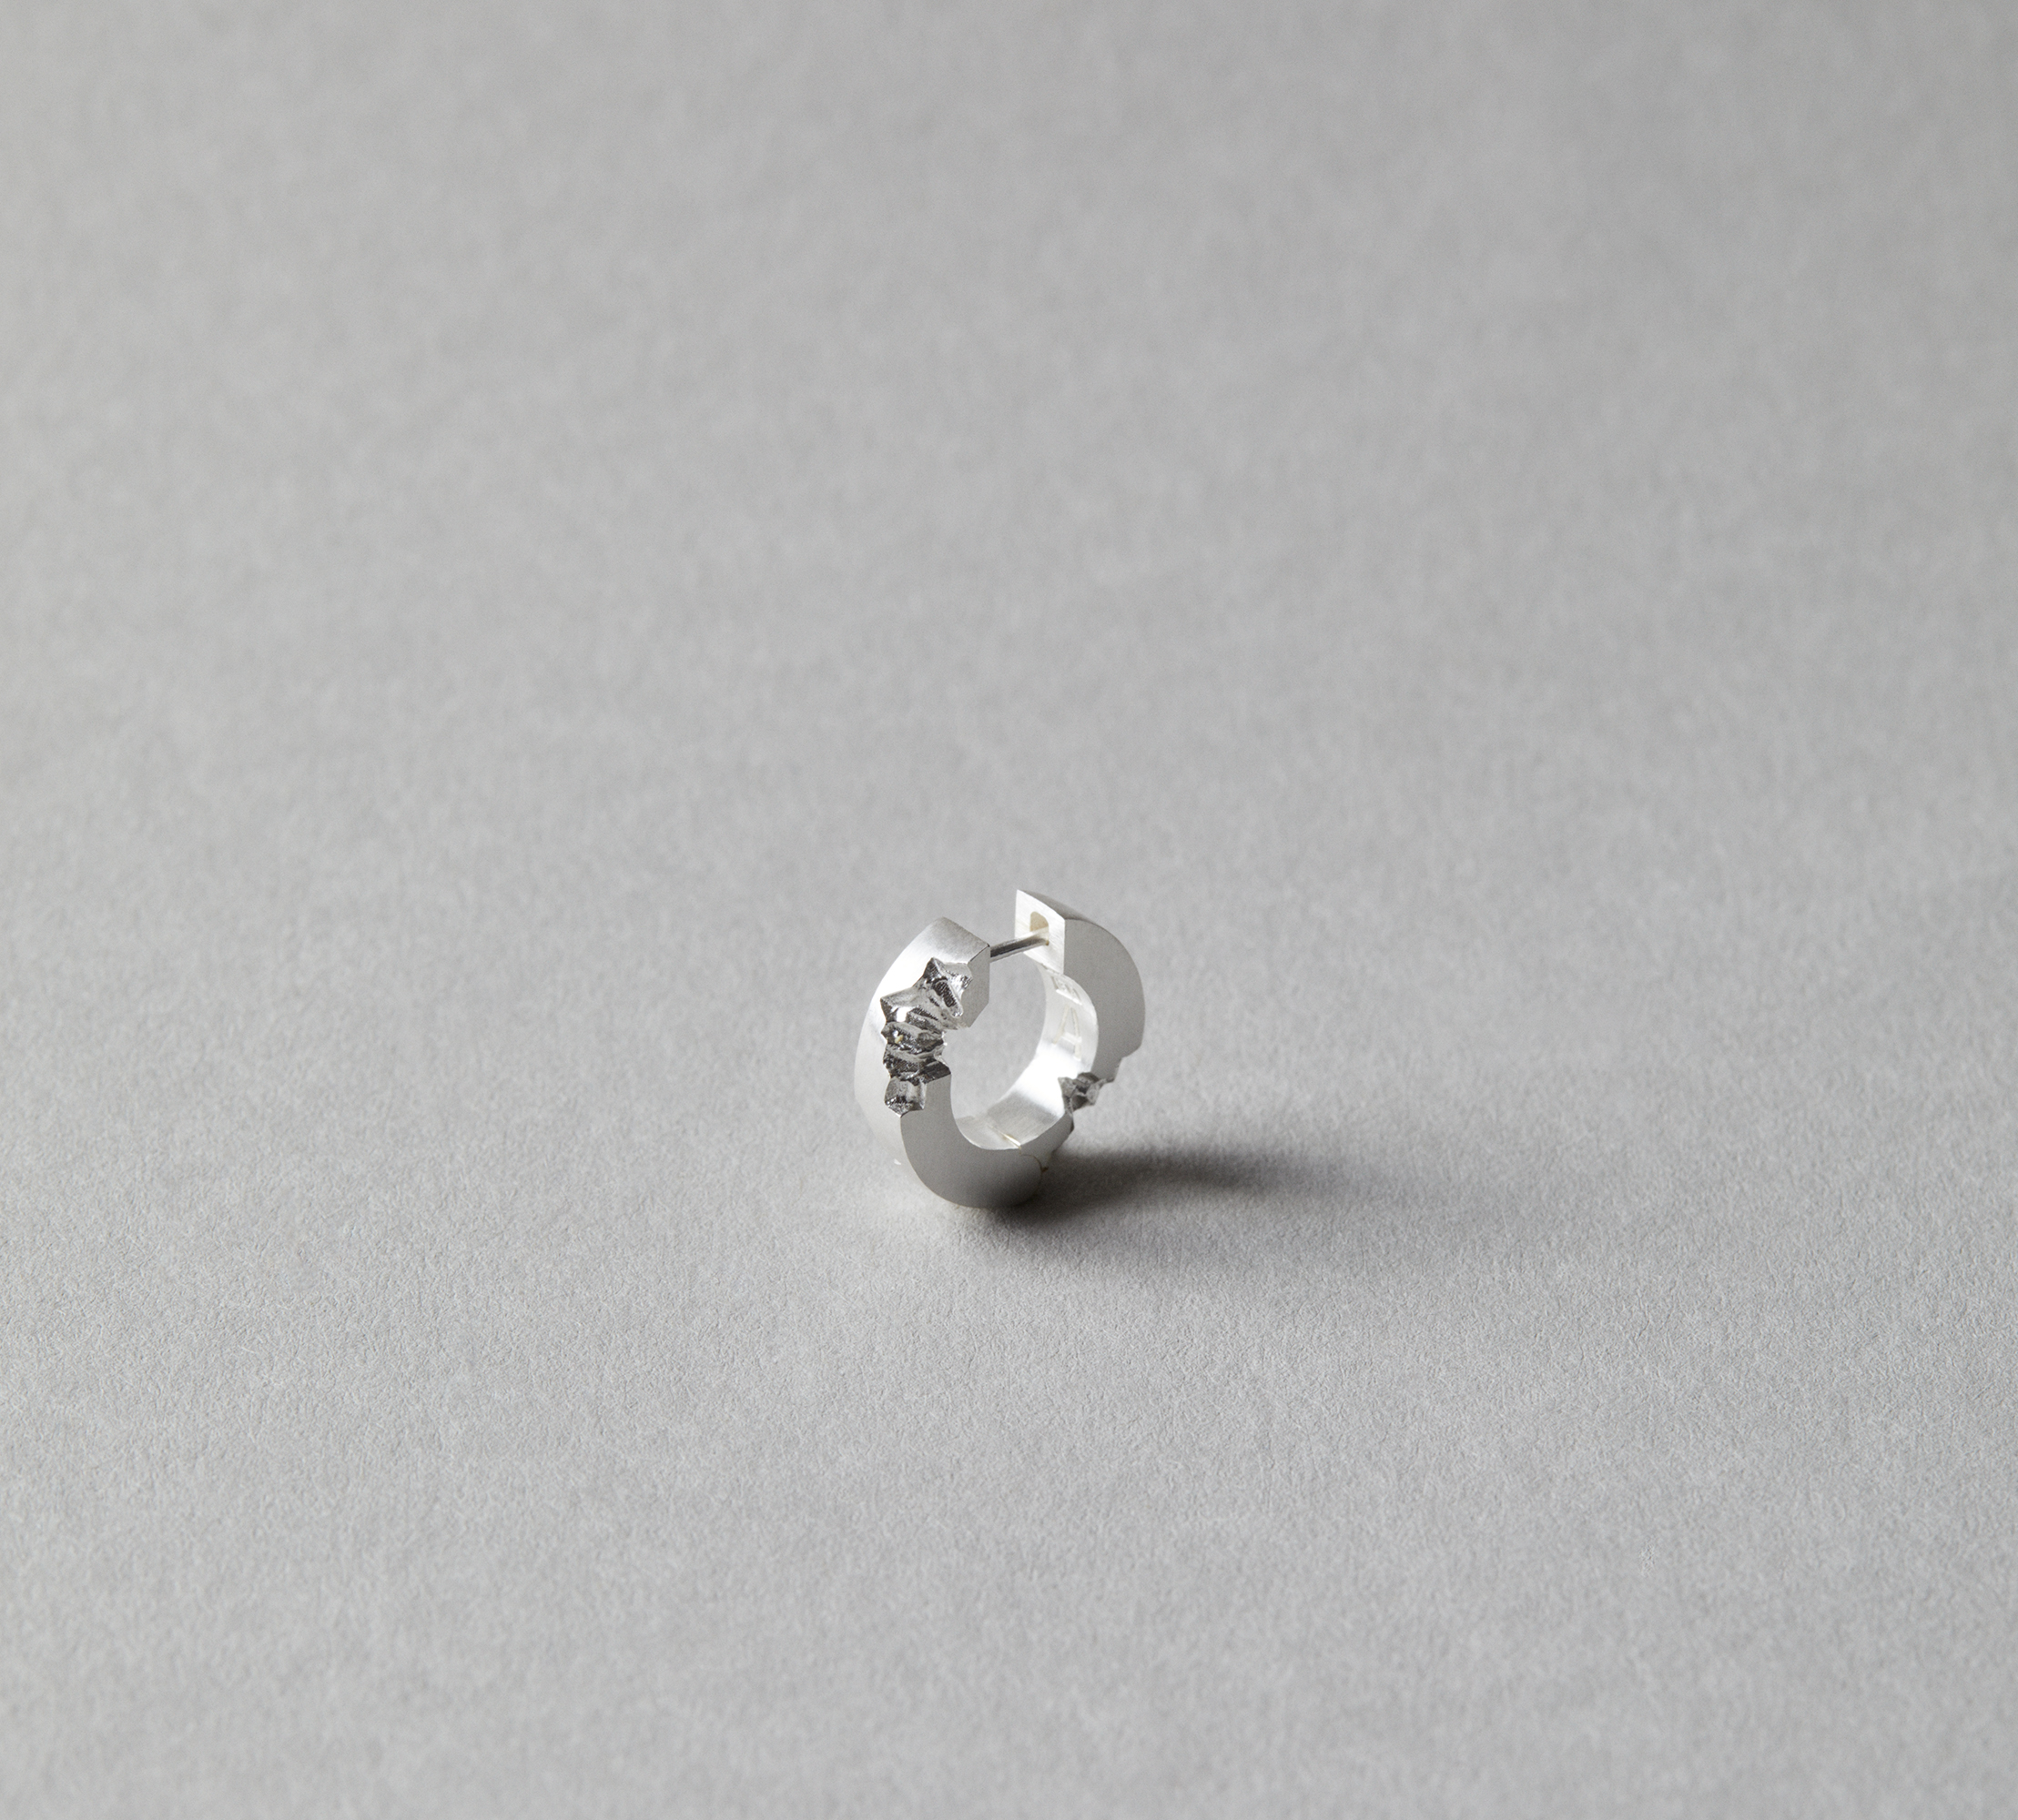 Round Cracked Earring Silver